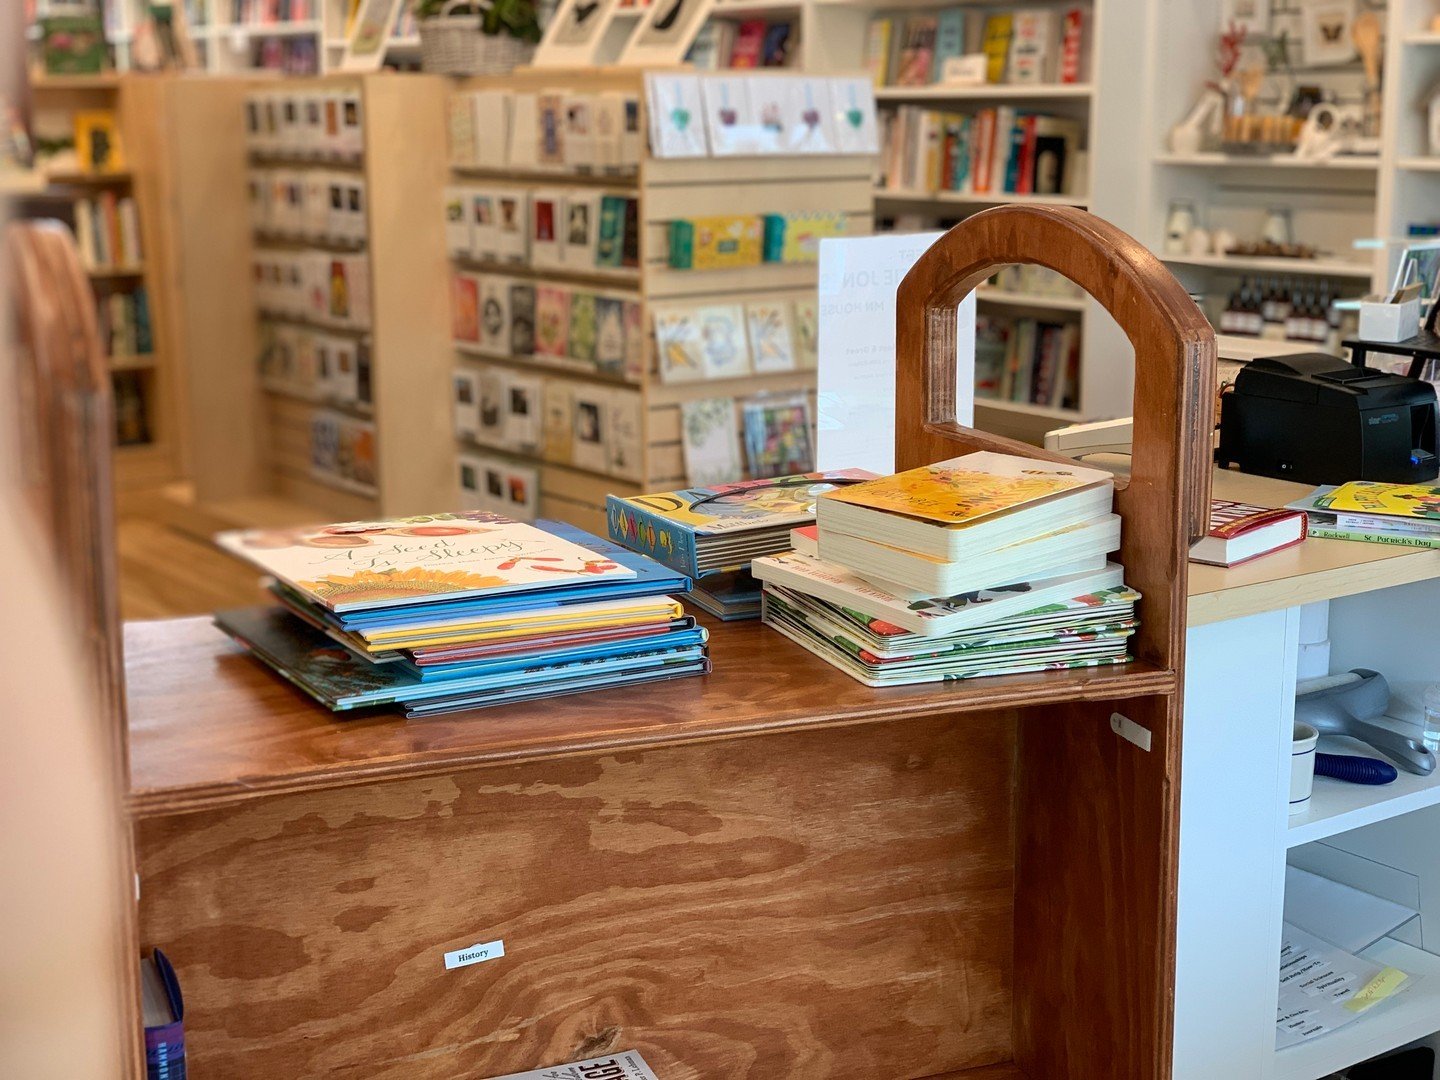 This Friday, we are taking the time to enjoy the little snippets of joy in the store! 

One of our favorite parts of bookselling is our beloved book cart, even if it does make a bit of noise when we wheel it around. It makes us feel like real booksel